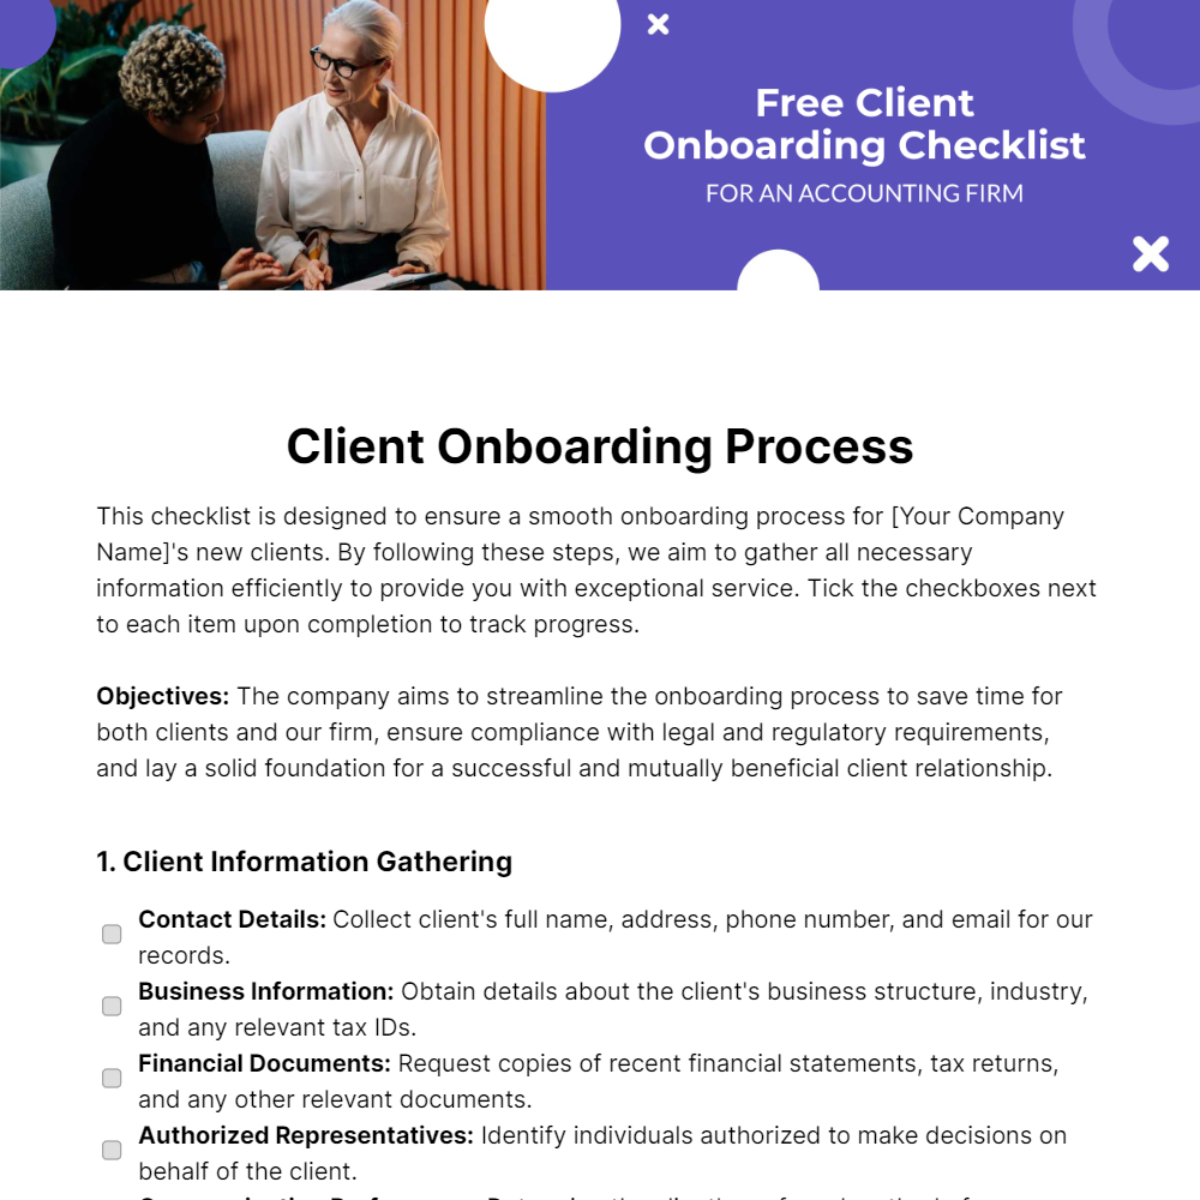 Free Client Onboarding Checklist for an Accounting Firm Template